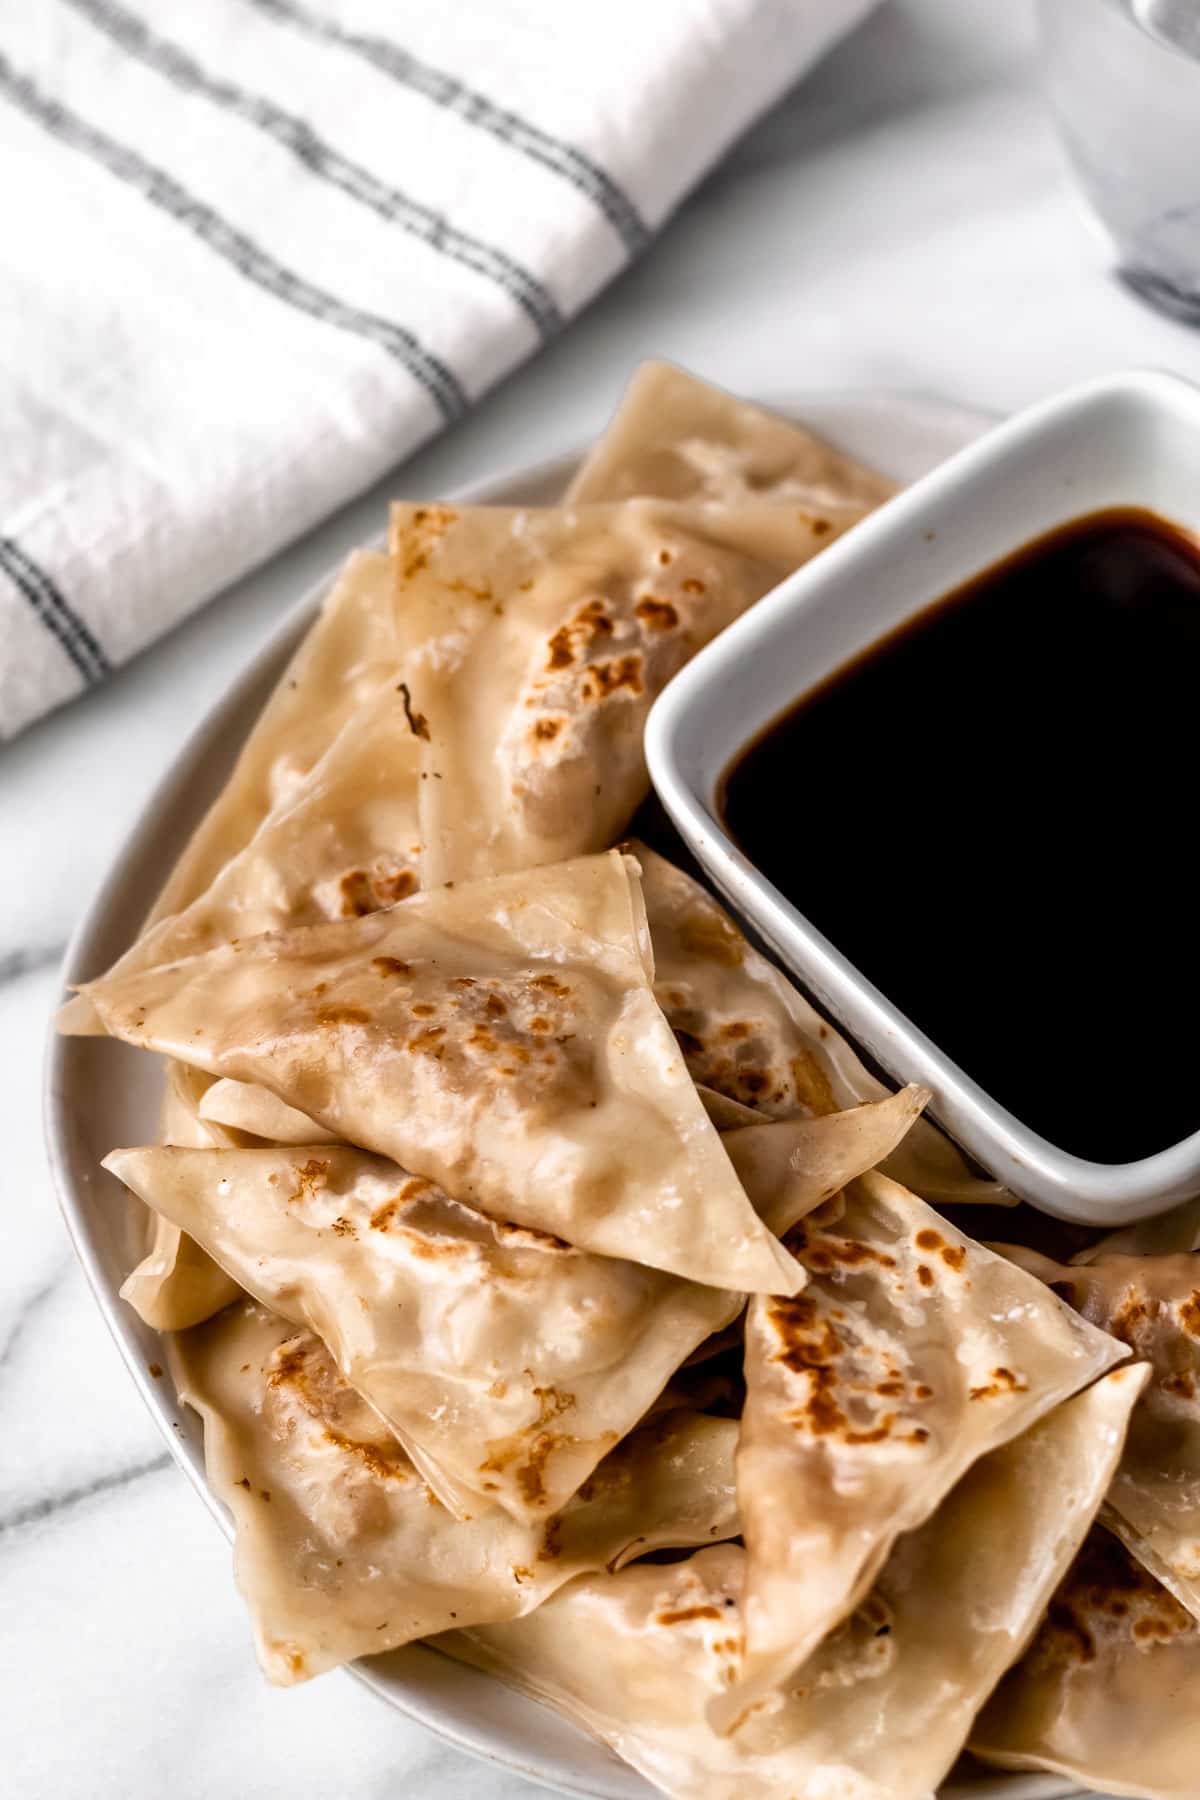 Potstickers on a plate with a bowl of dipping sauce.